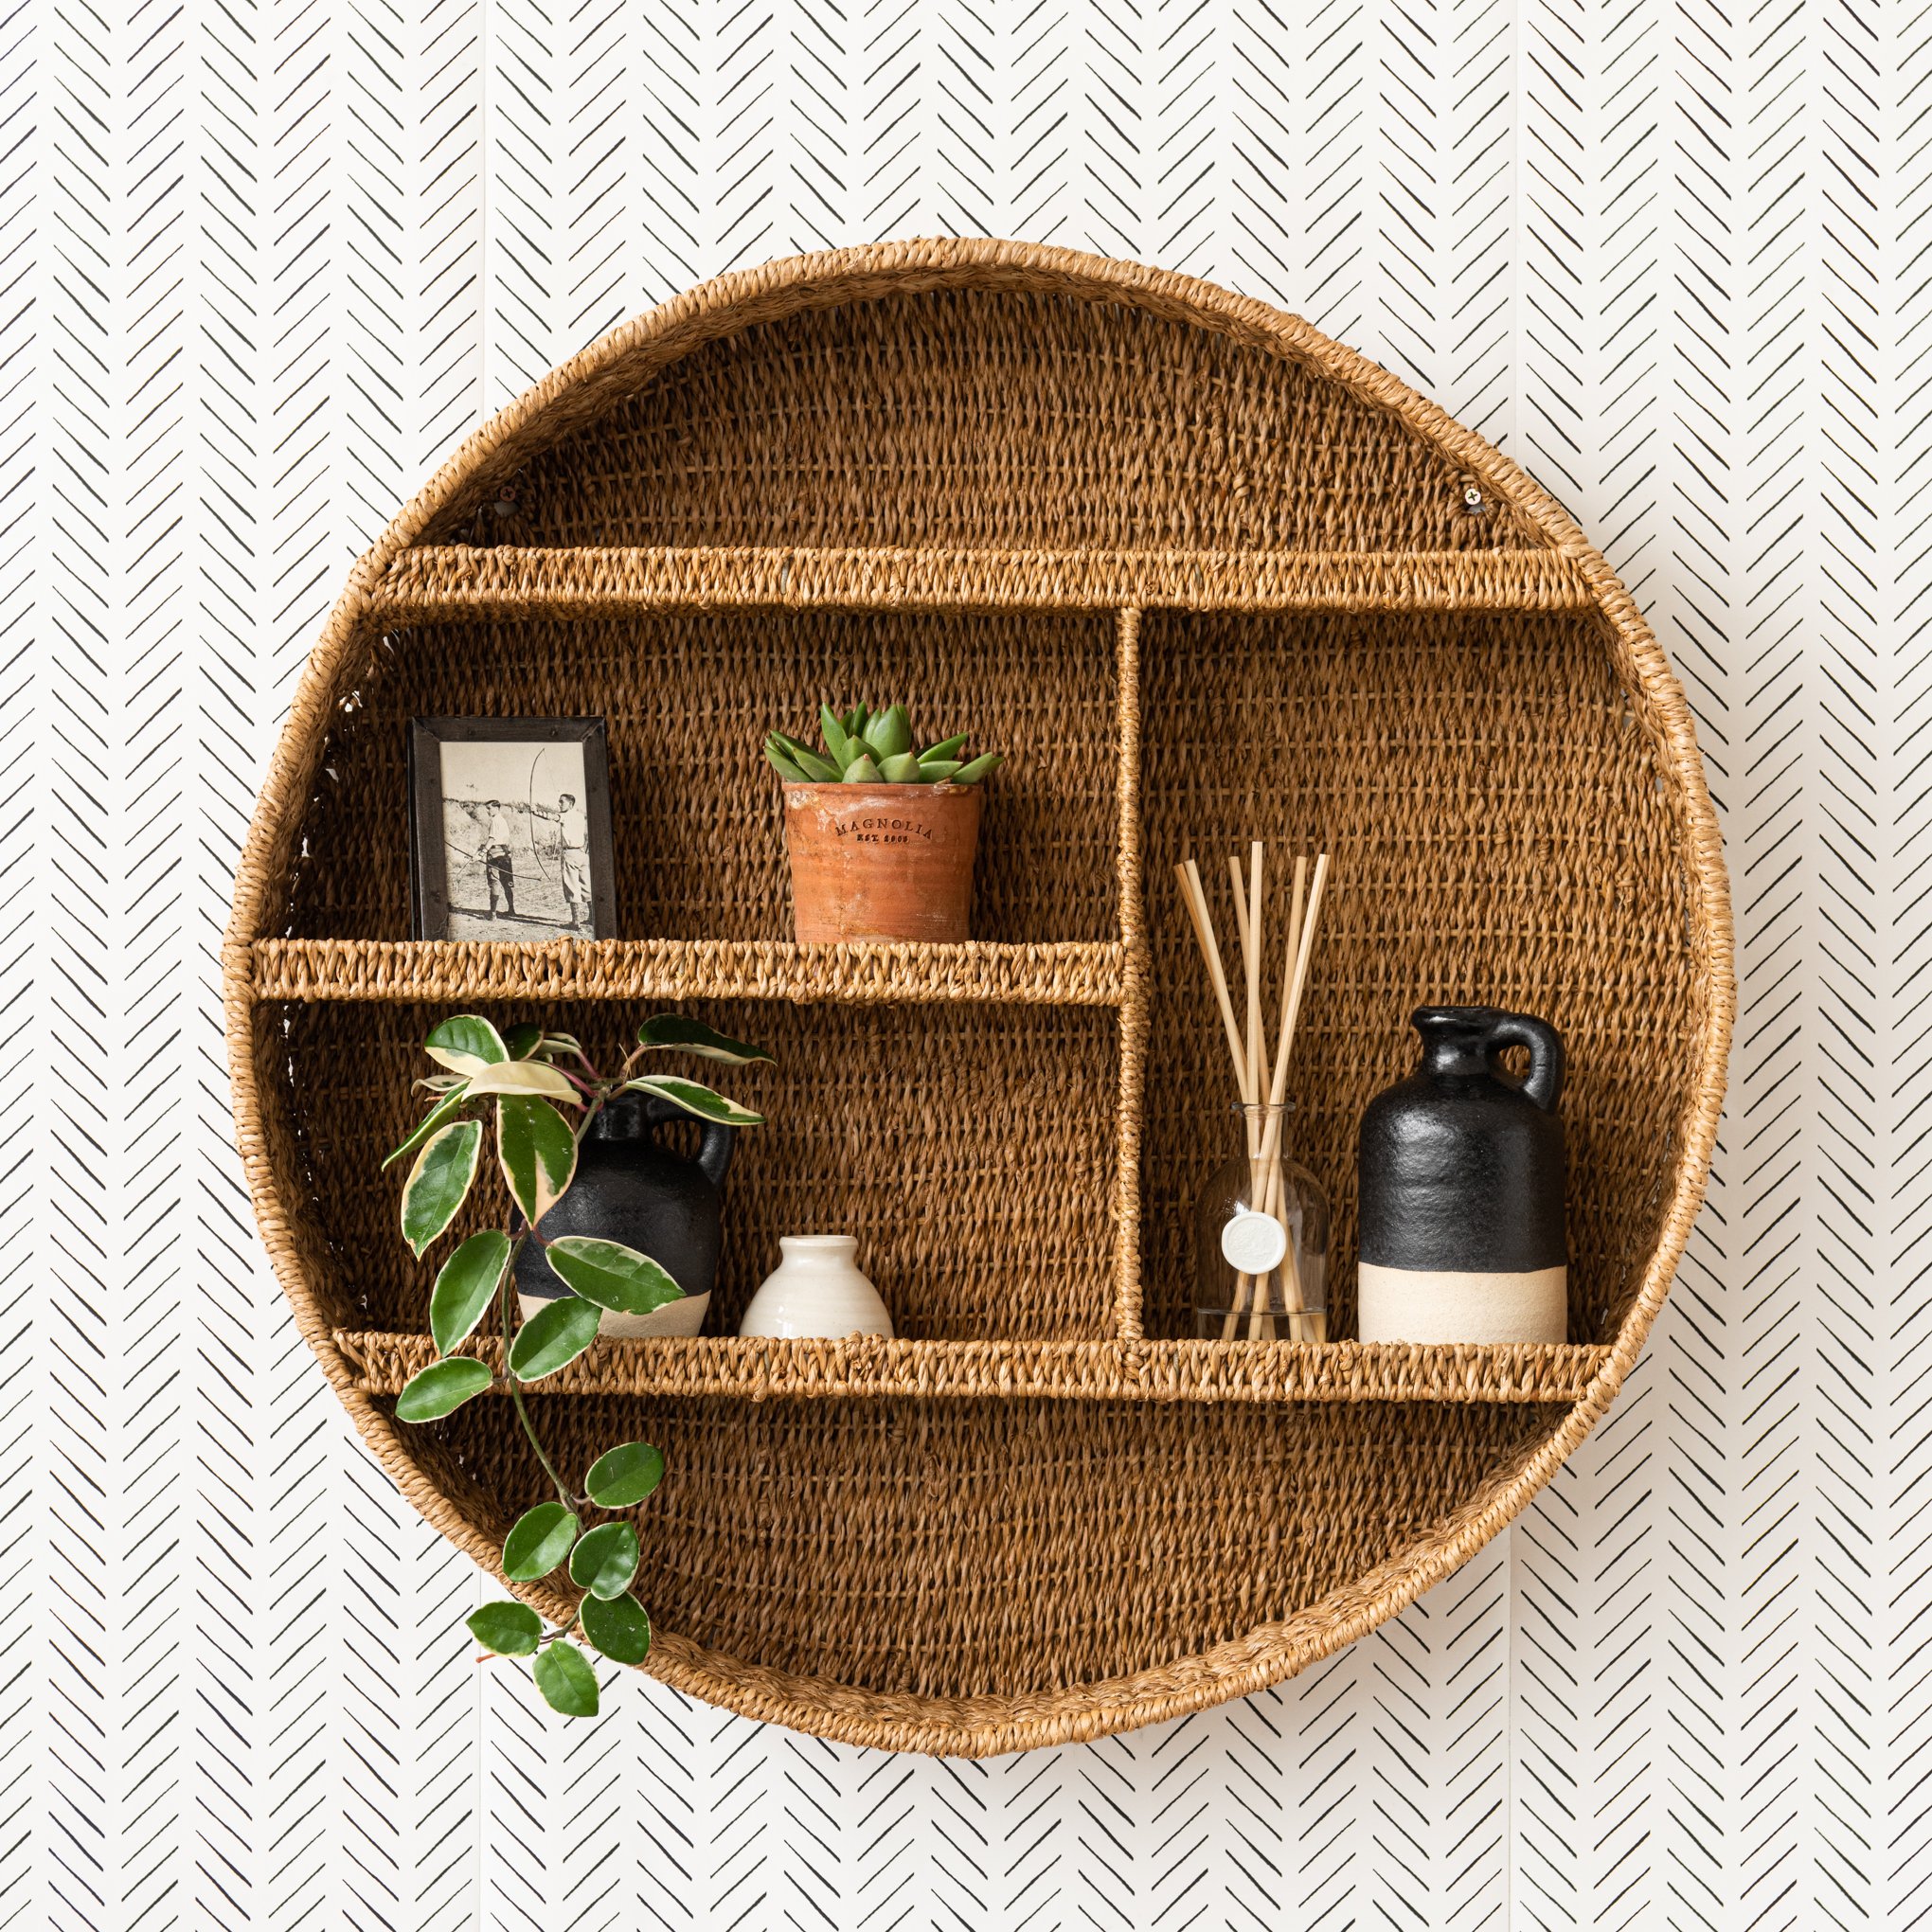 round woven wall organization shelf On sale for $114.80, discounted from $164.00